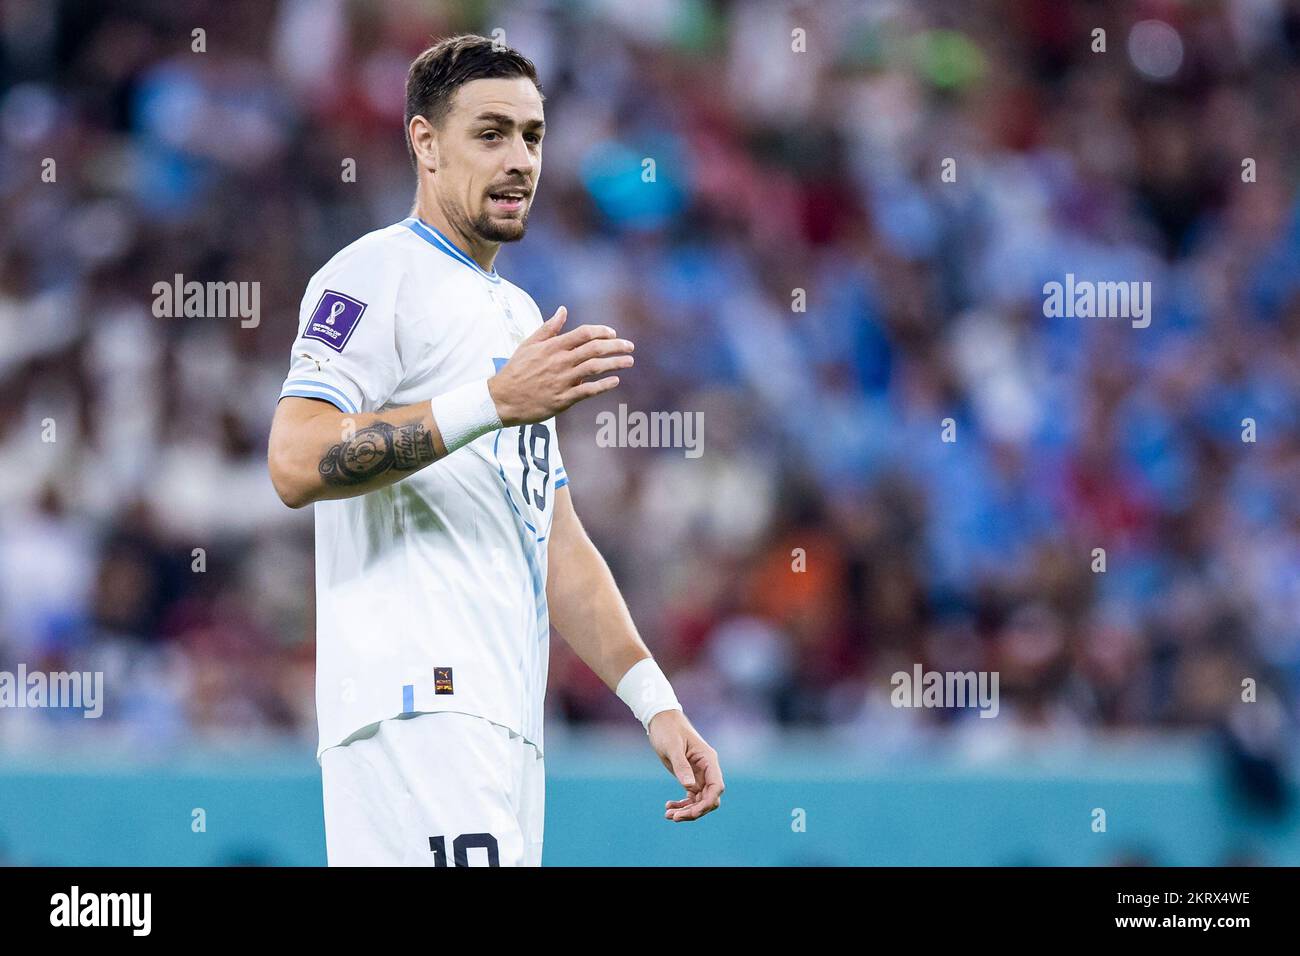 Lusail, Qatar. 28th Nov, 2022. Soccer: World Cup, Portugal - Uruguay, preliminary round, Group H, Matchday 2, Lusail Iconic Stadium, Uruguay's Sebastian Coates gestures. Credit: Tom Weller/dpa/Alamy Live News Stock Photo